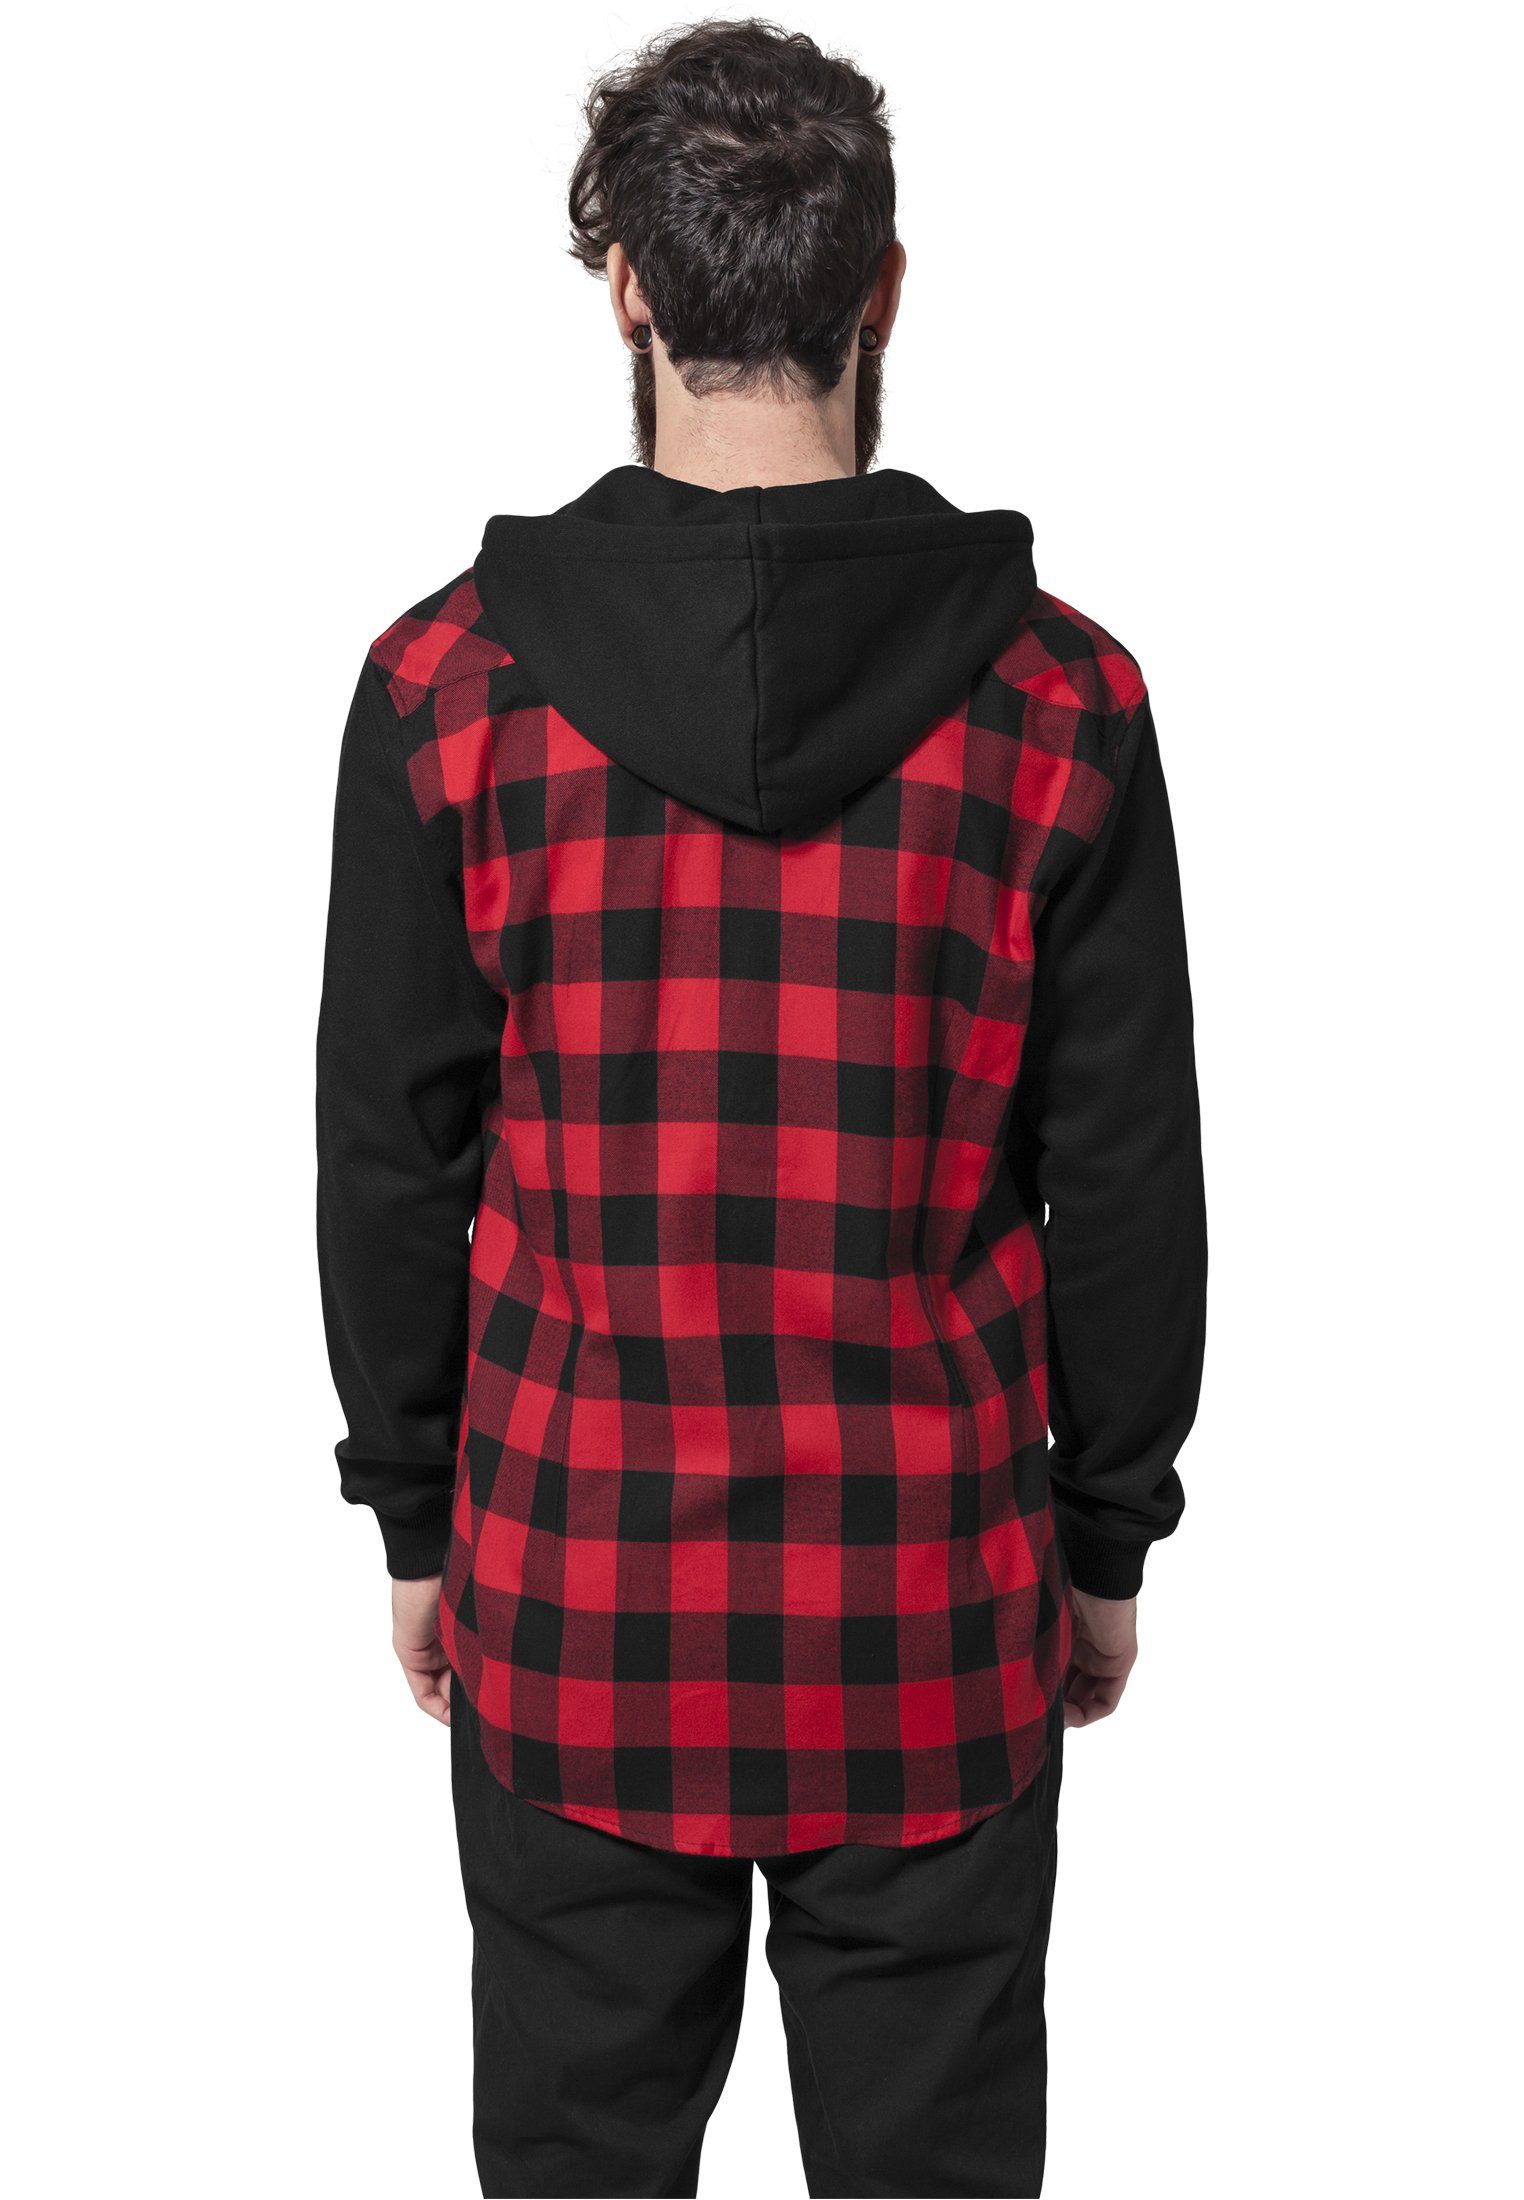 URBAN CLASSICS Shirtjacke Herren Hooded Sweat Sleeve blk/red/bl Flanell (1-tlg) Checked Shirt